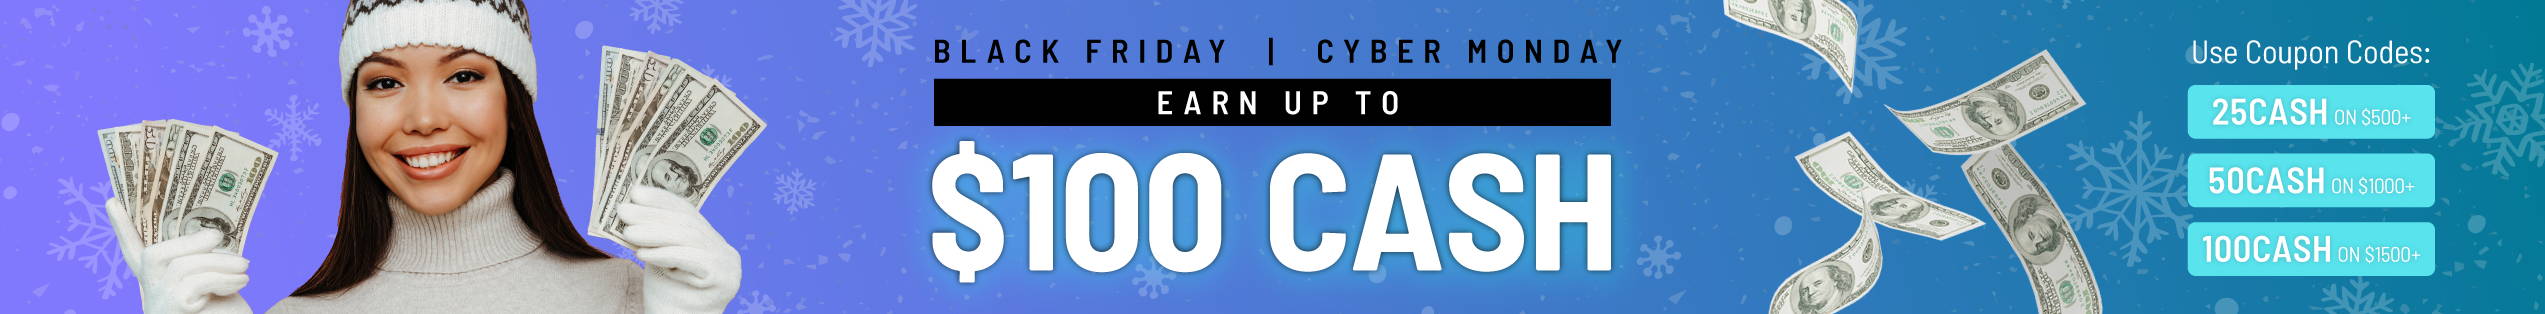 Holiday Cash - Earn up to $100 Cash